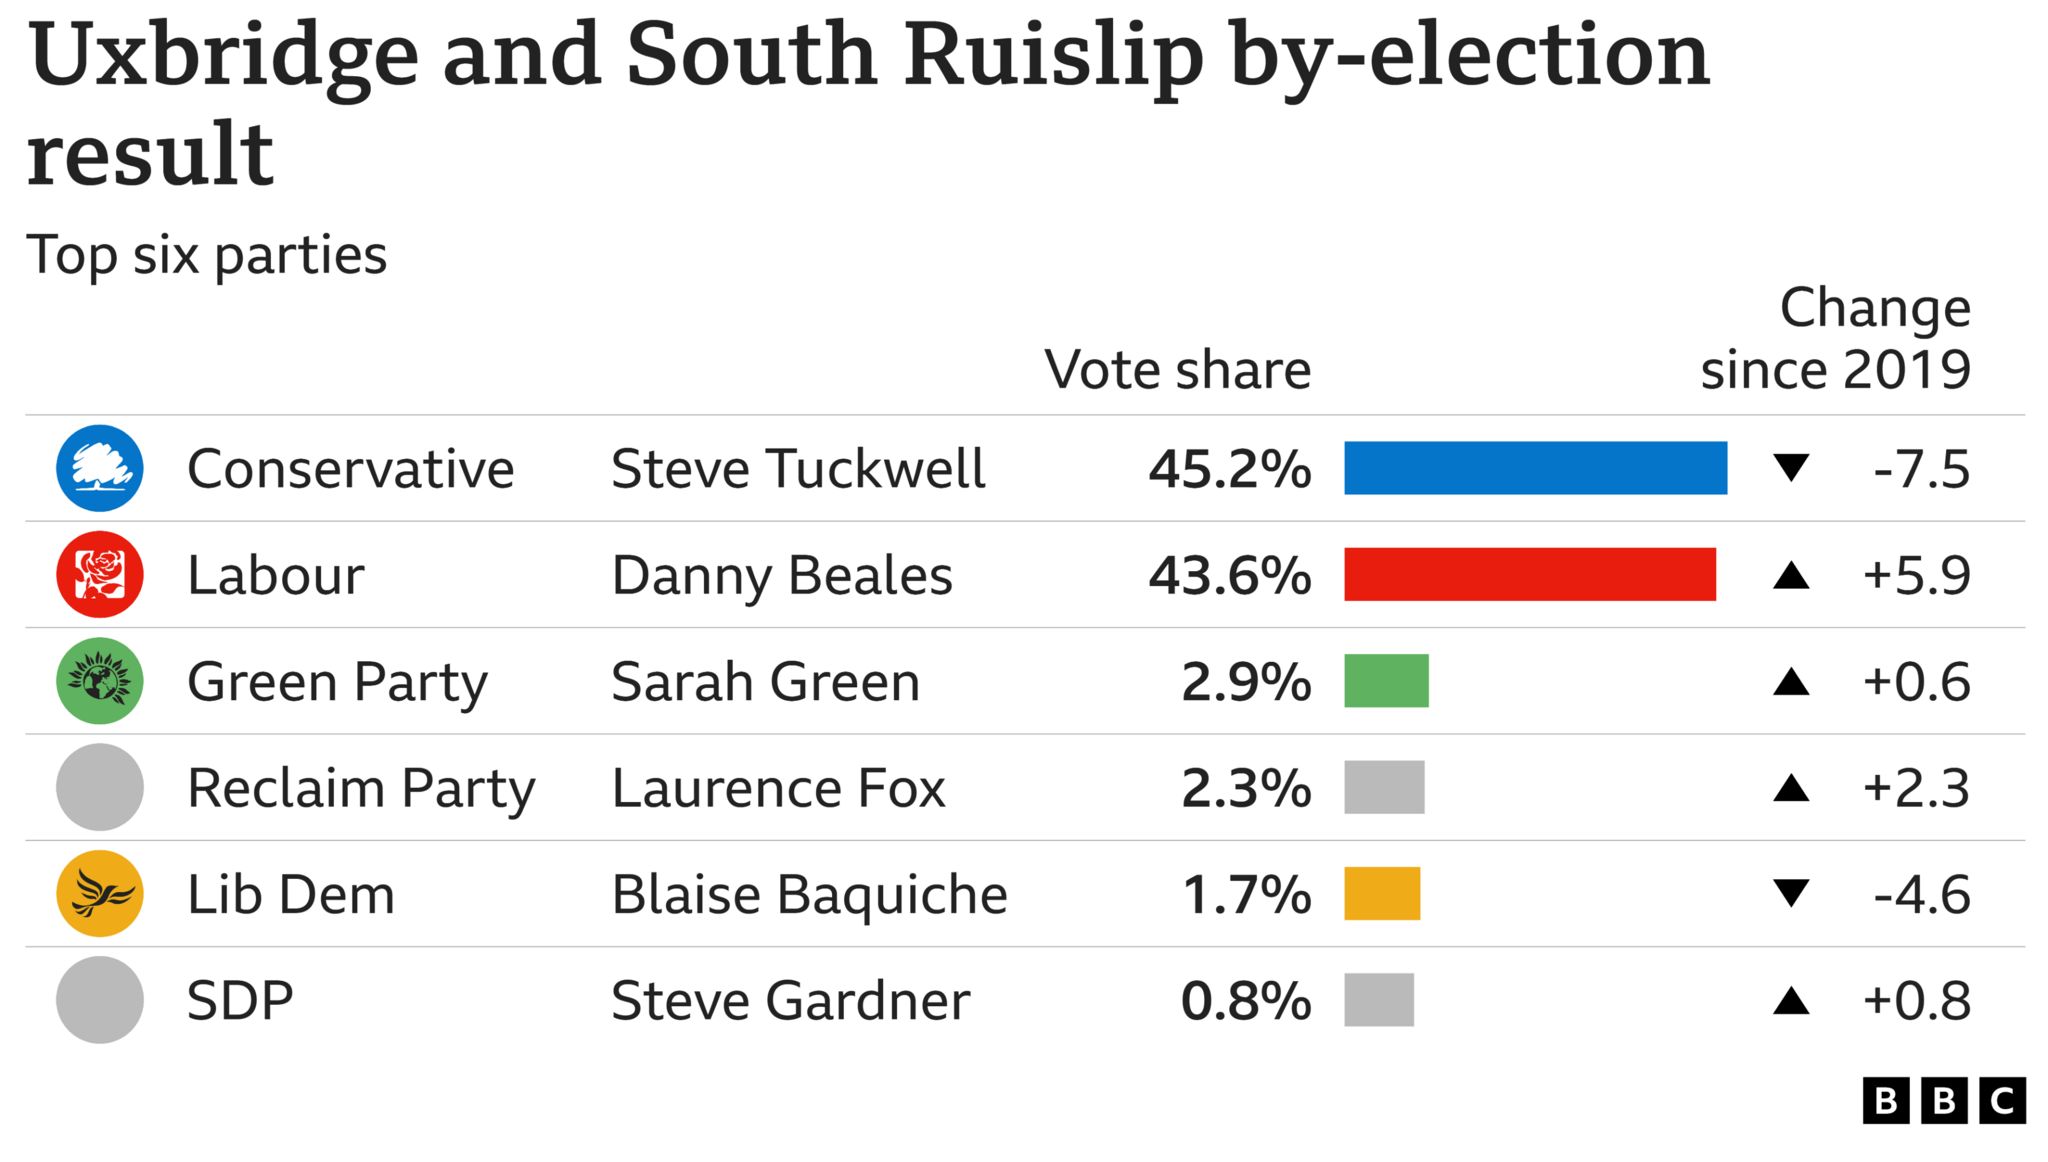 Uxbridge and South Ruislip by-election results